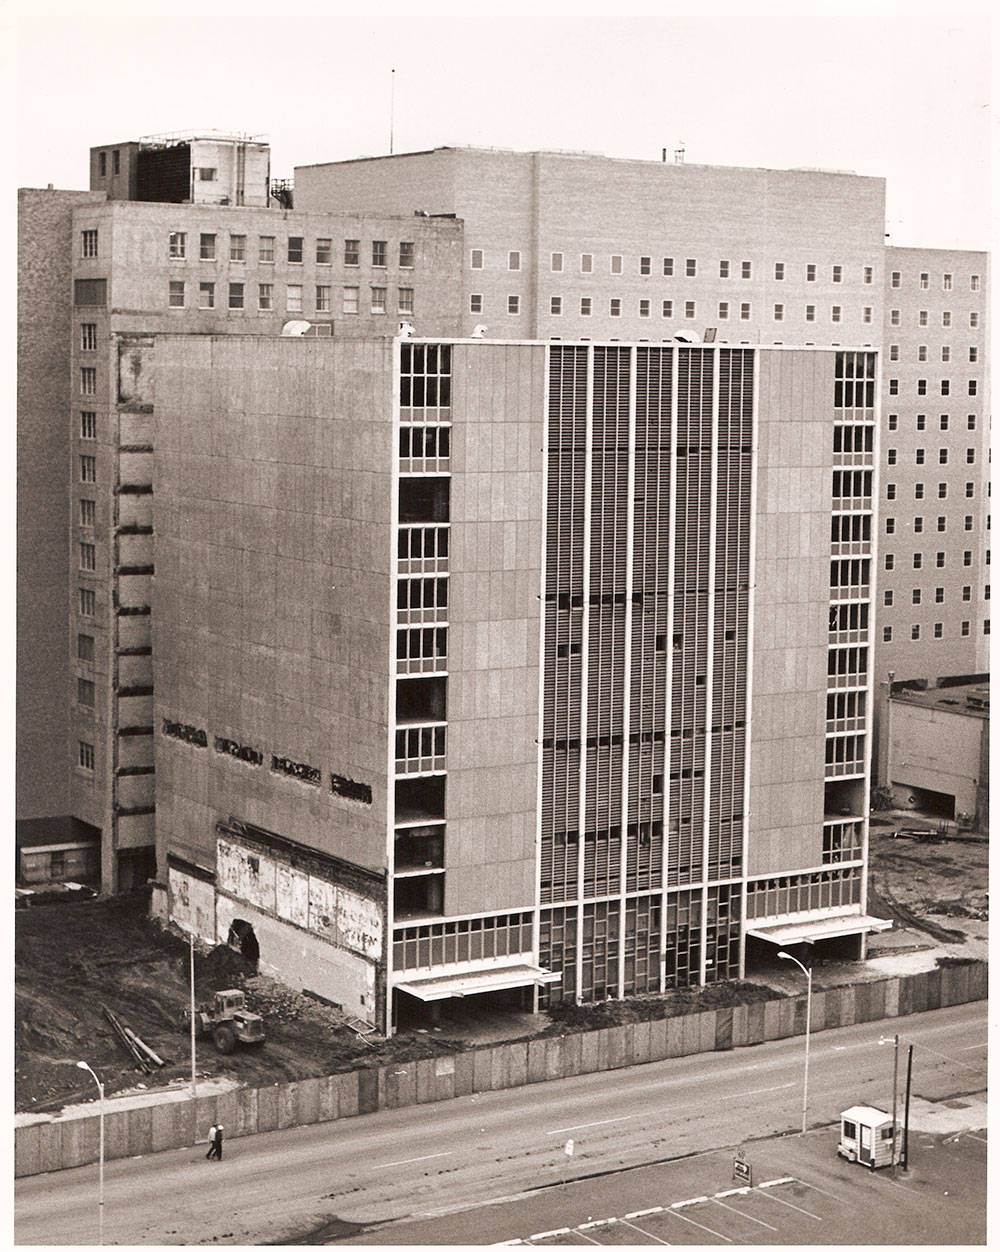 (FNB.2010.3.31) - First National Bank Parking Garage Prepped for Demolition, 117 W Main, 7 May 1972